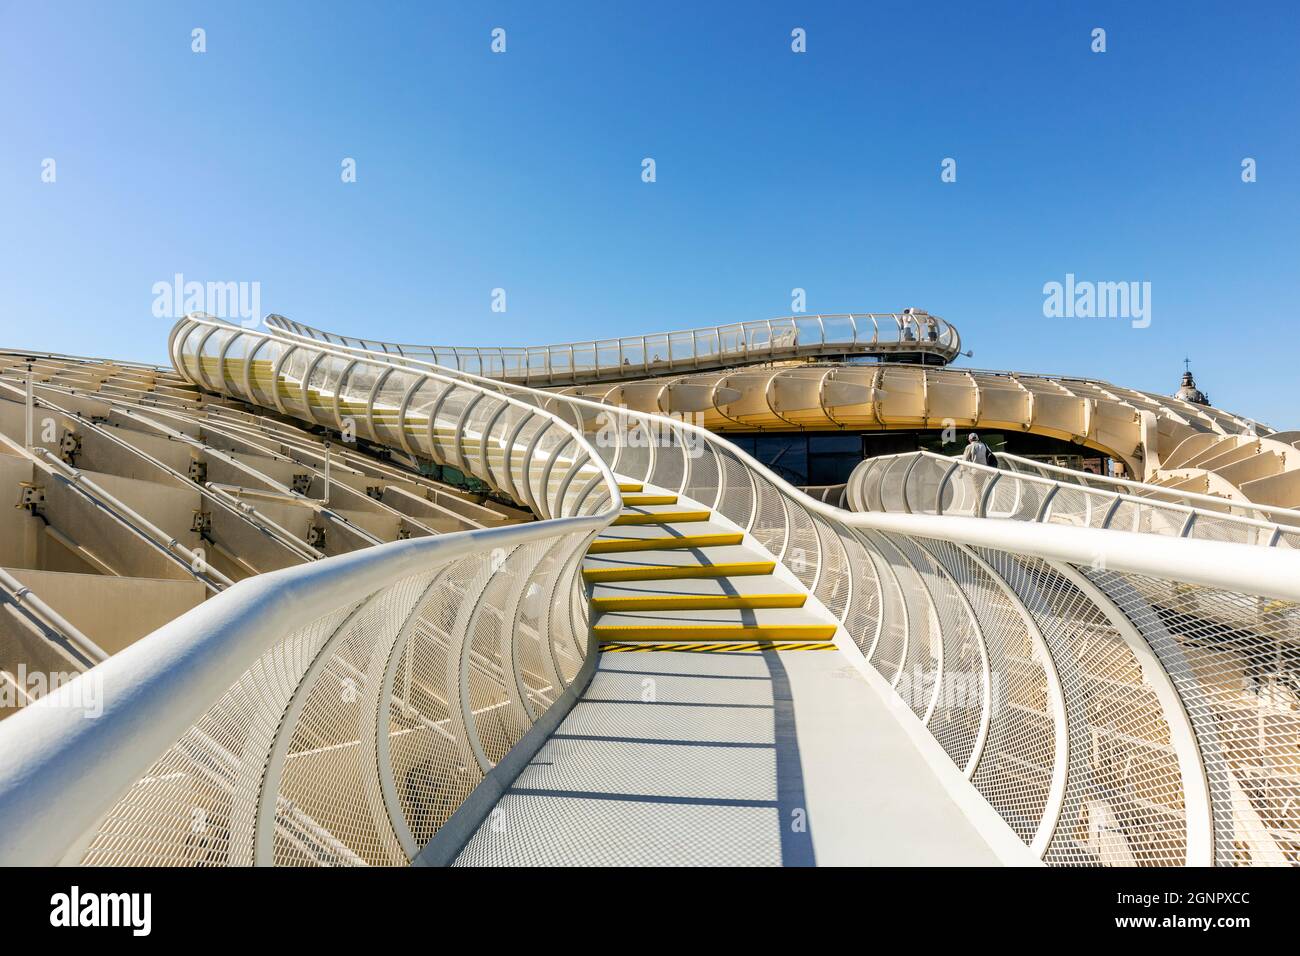 Architectural detail of Setas de Sevilla - wooden roof with walkways on the top with amazing panoramic view of the city, Seville, Andalusia, Spain Stock Photo